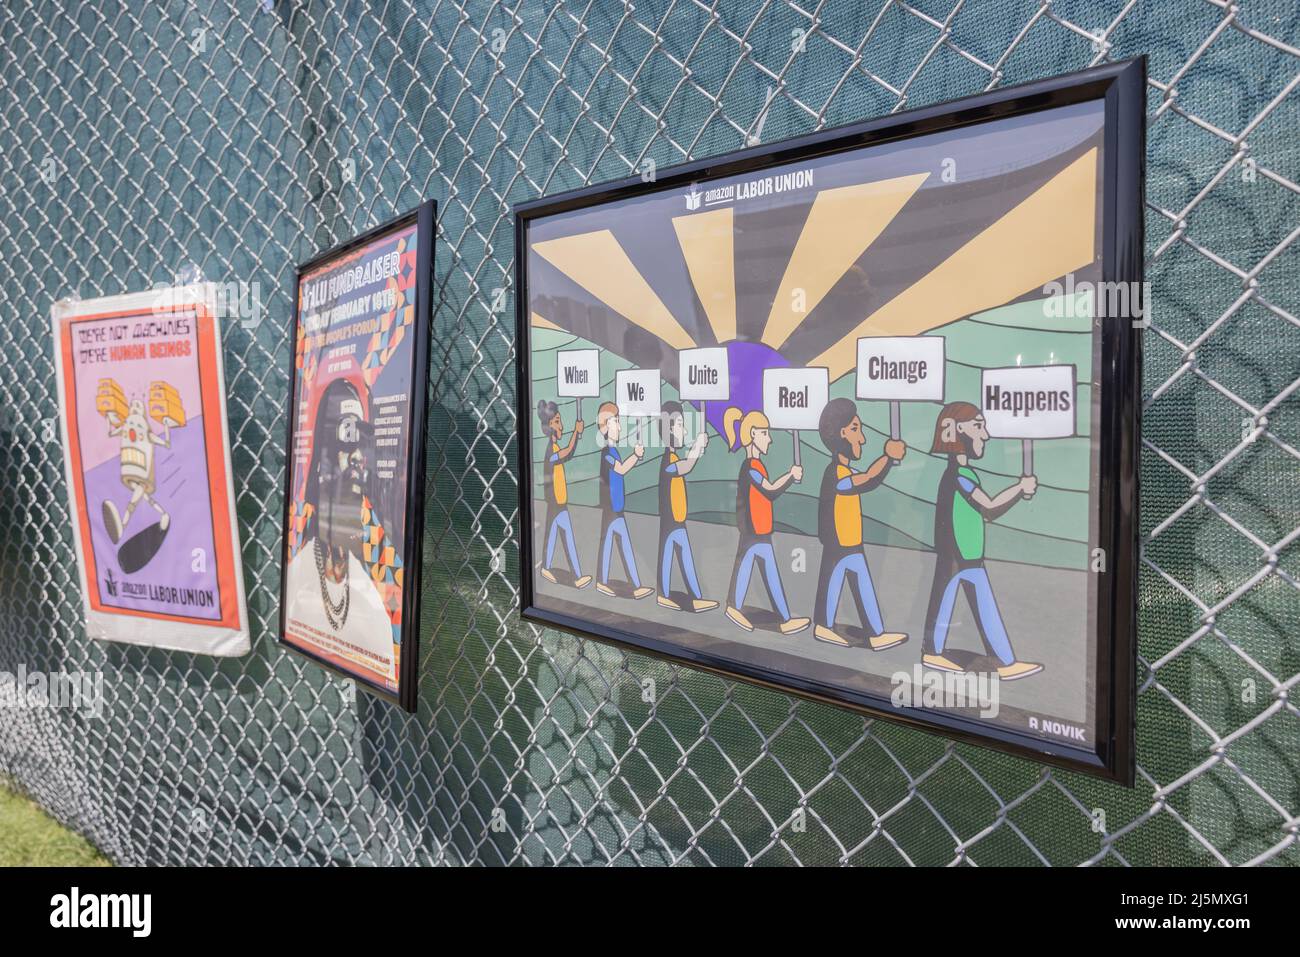 STATEN ISLAND, N.Y. – April 24, 2022: Pictures are seen on a fence at a Staten Island Amazon facility after an Amazon Labor Union rally. Stock Photo